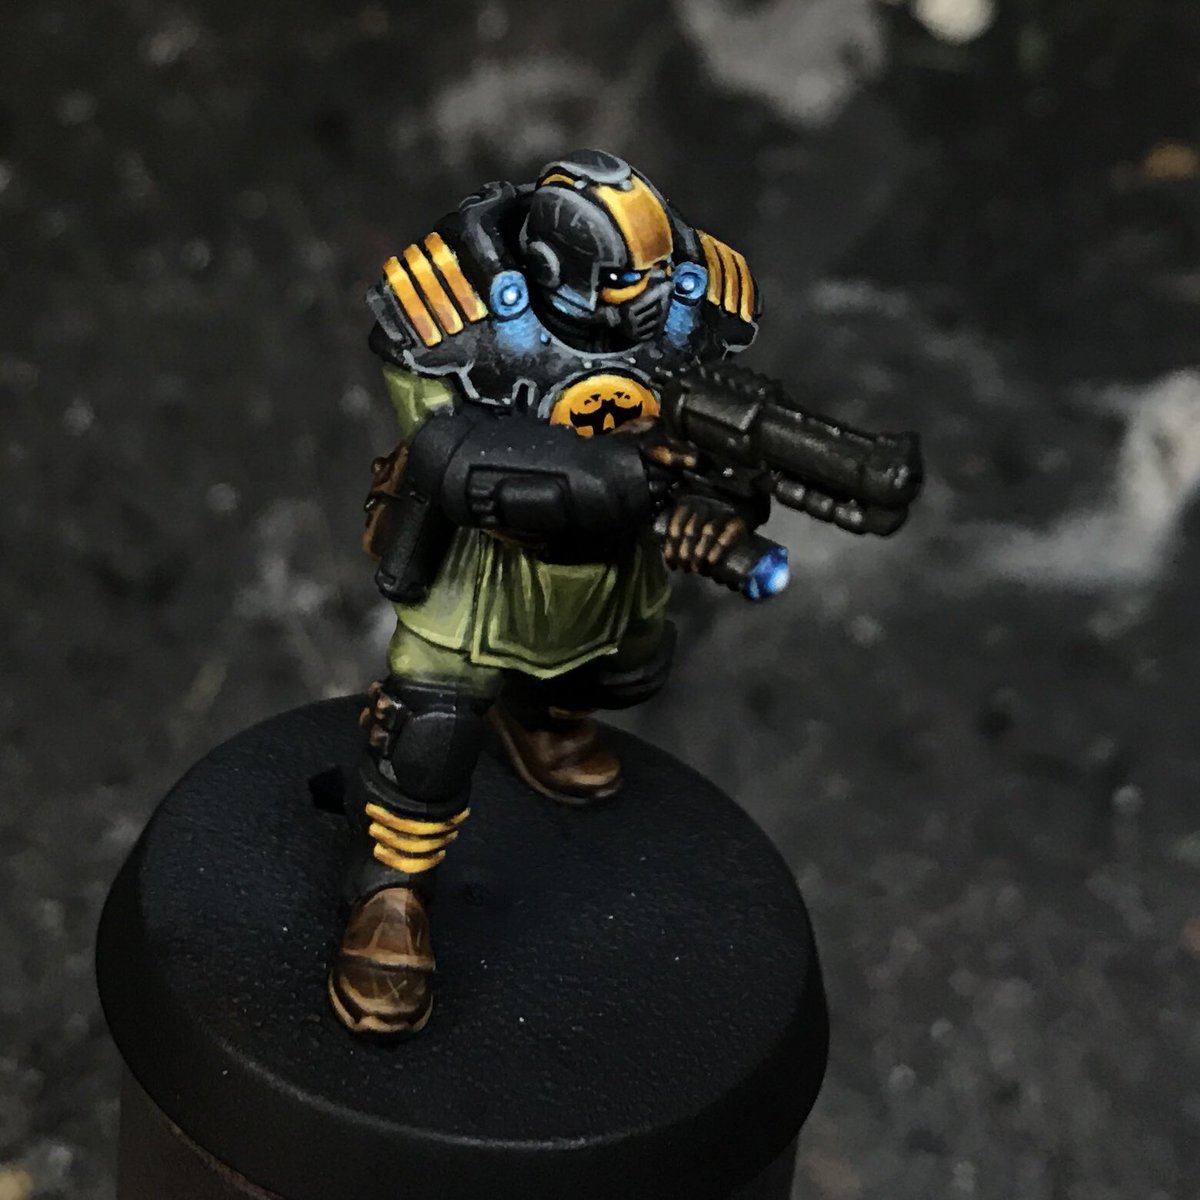 Here is the first model WIP from a Palanite Enforcer project. I hope you all like it! 

#necromunda #warhammer #paintingwarhammer #warhammer40k #warmongers #palaniteenforcers #goliath #tabletopgaming #wargaming #underhive #tabletoppainting #commissionpainting #warhammercommunity